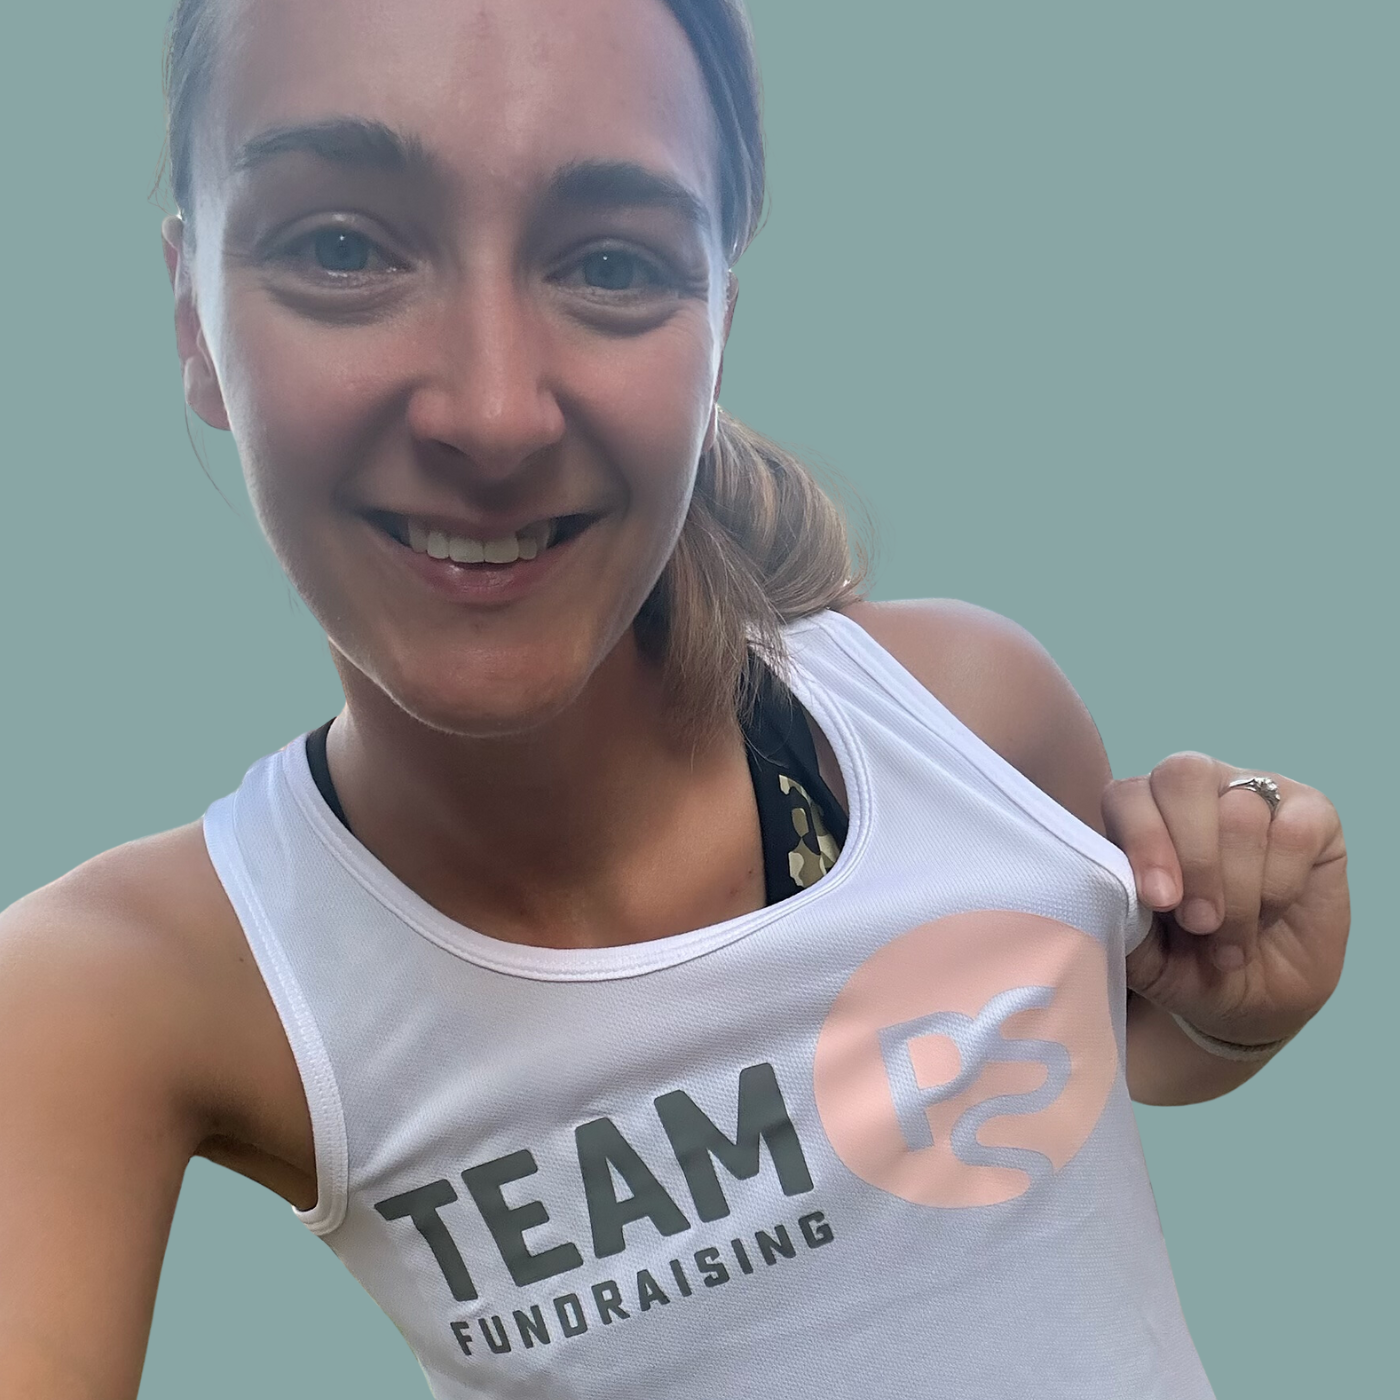 Woman holding her fundraising shirt smiling